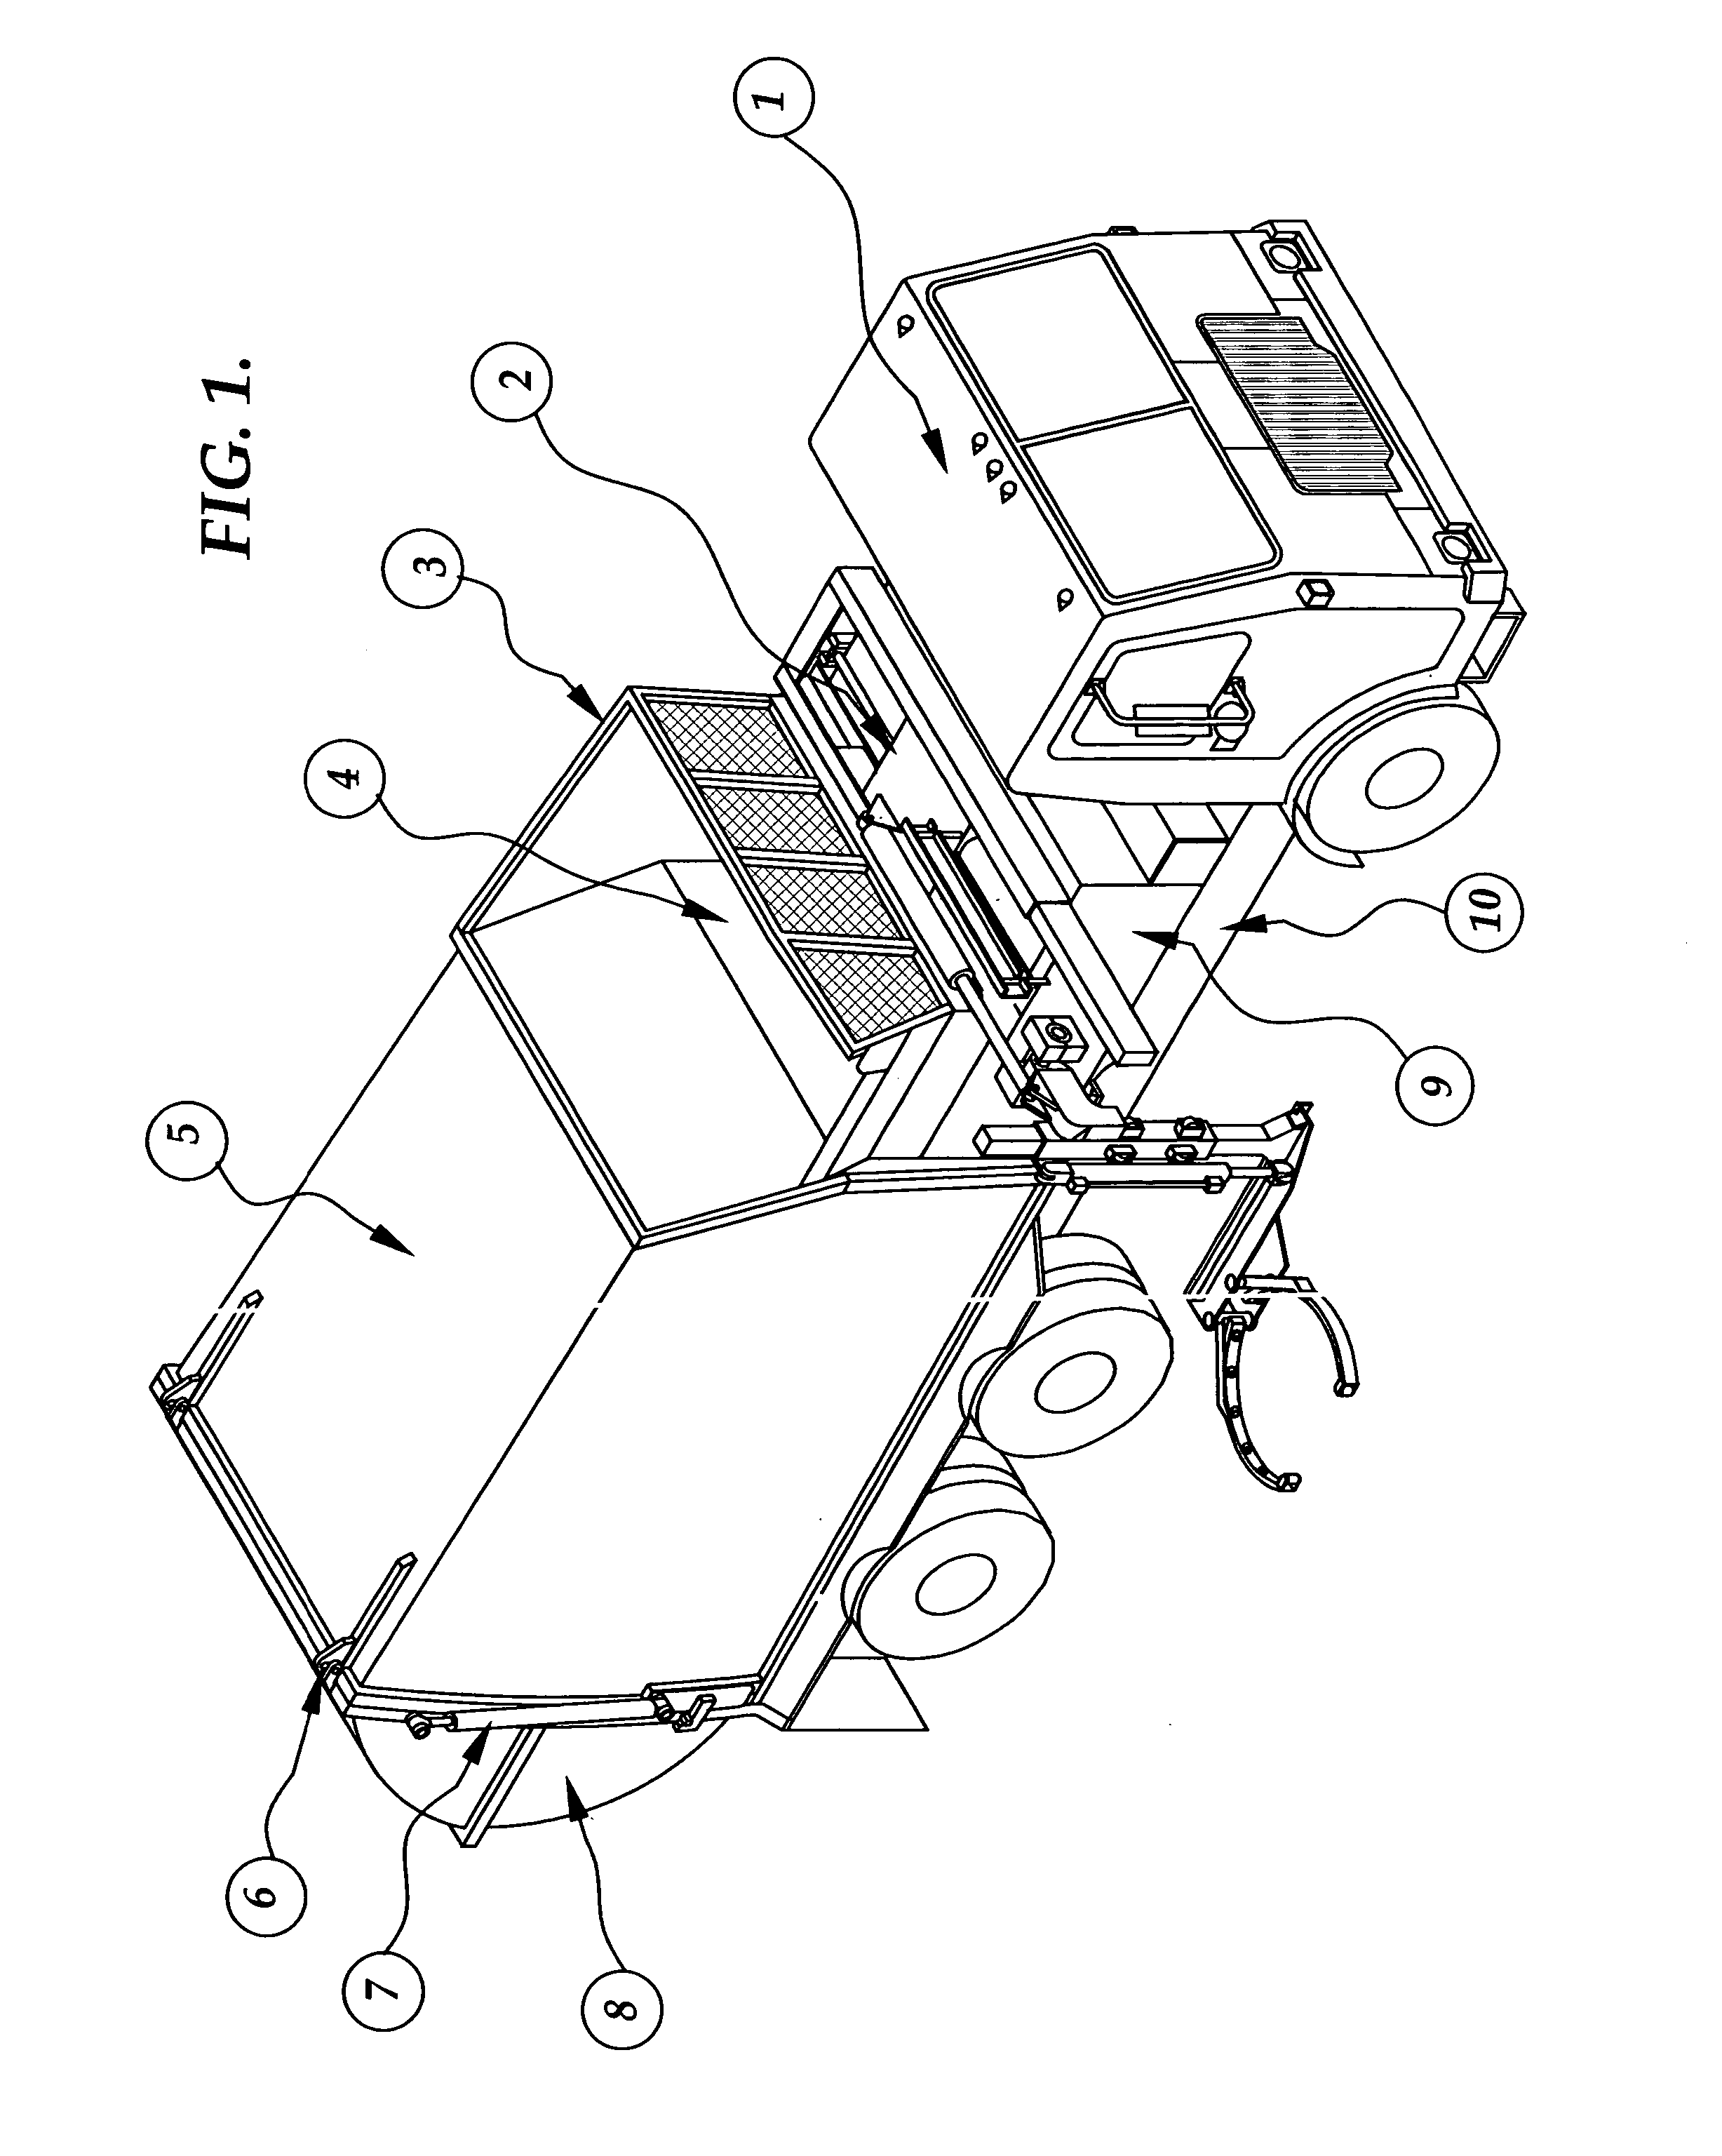 System for automatically capturing a fully loaded refuse container, and without any spillage, empty the contents of the refuse container into a refuse collection vehicle